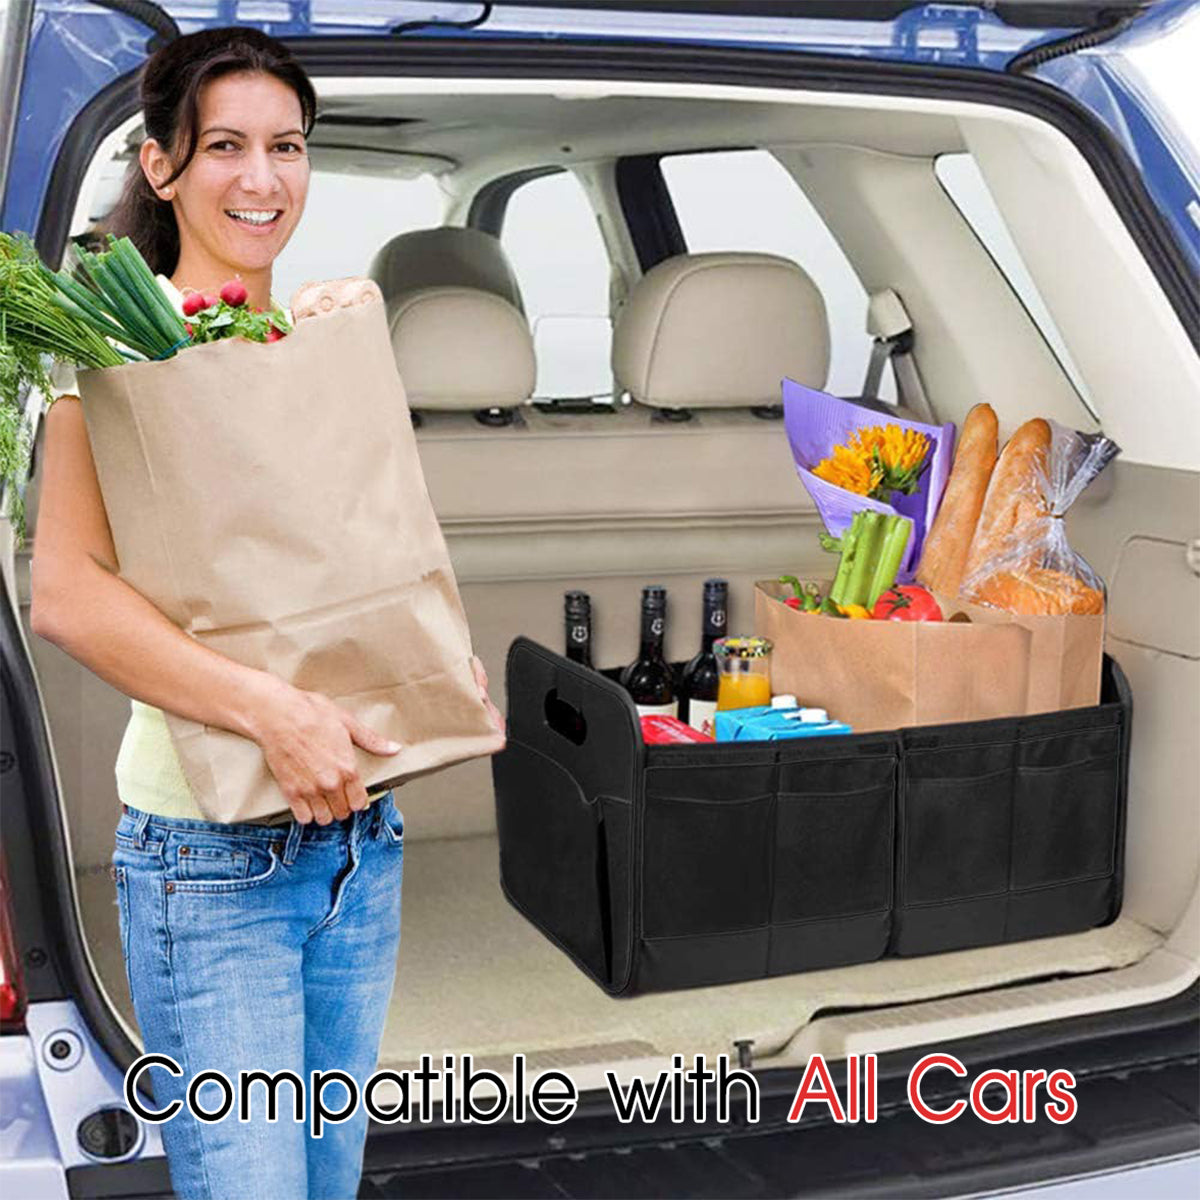 Trunk Organizer, Car Storage, Custom For Your Cars, Reinforced Handles, Collapsible Multi, Compartment Car Organizers, Foldable and Waterproof, 600D Oxford Polyester LM12995